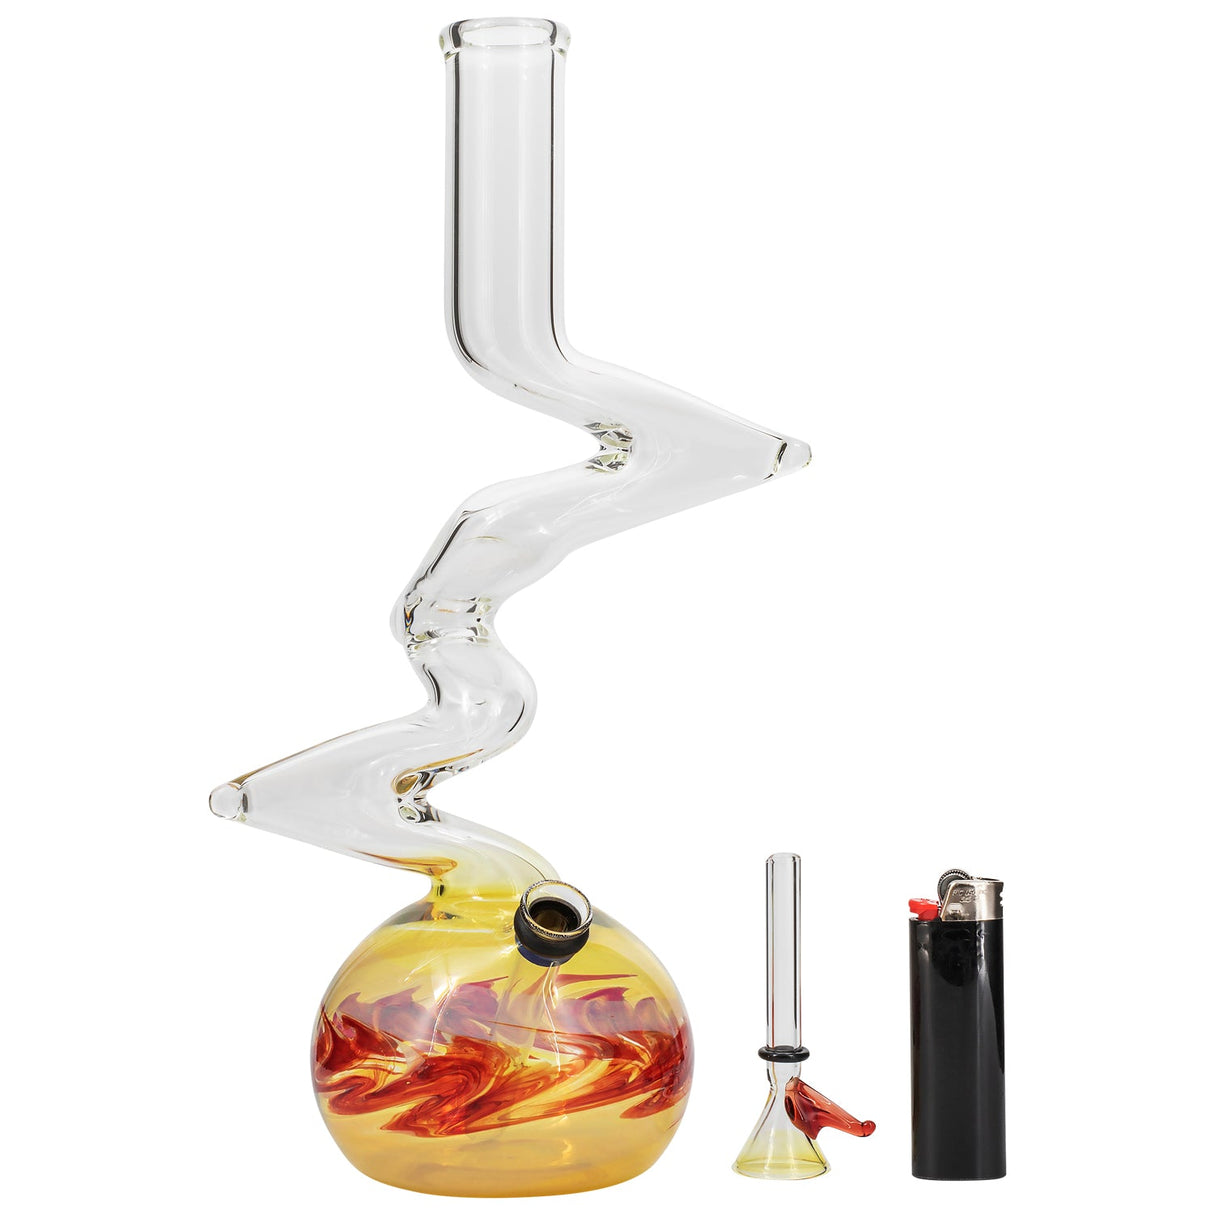 LA Pipes "Switchback" Bubble Base Bong front view with colorful base, clear glass, and accessories